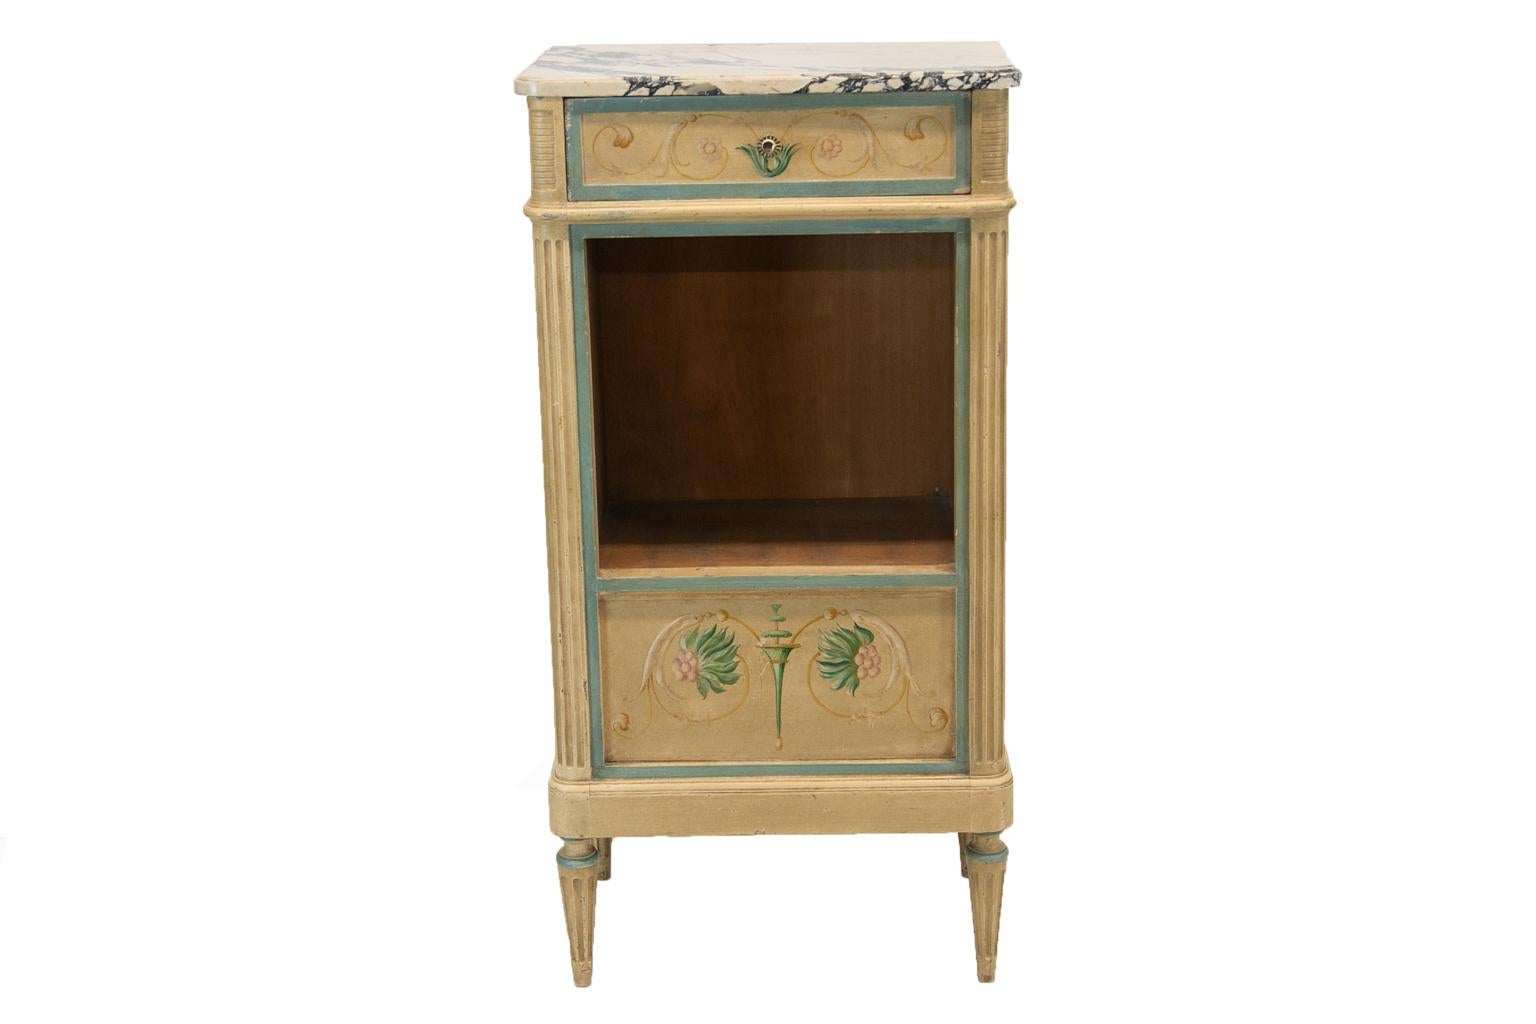 Painted Italianesque cabinet has the original marble with a shaped top edge and is painted with delicate floral arabesques. The corners are fluted, and end in fluted feet.
 